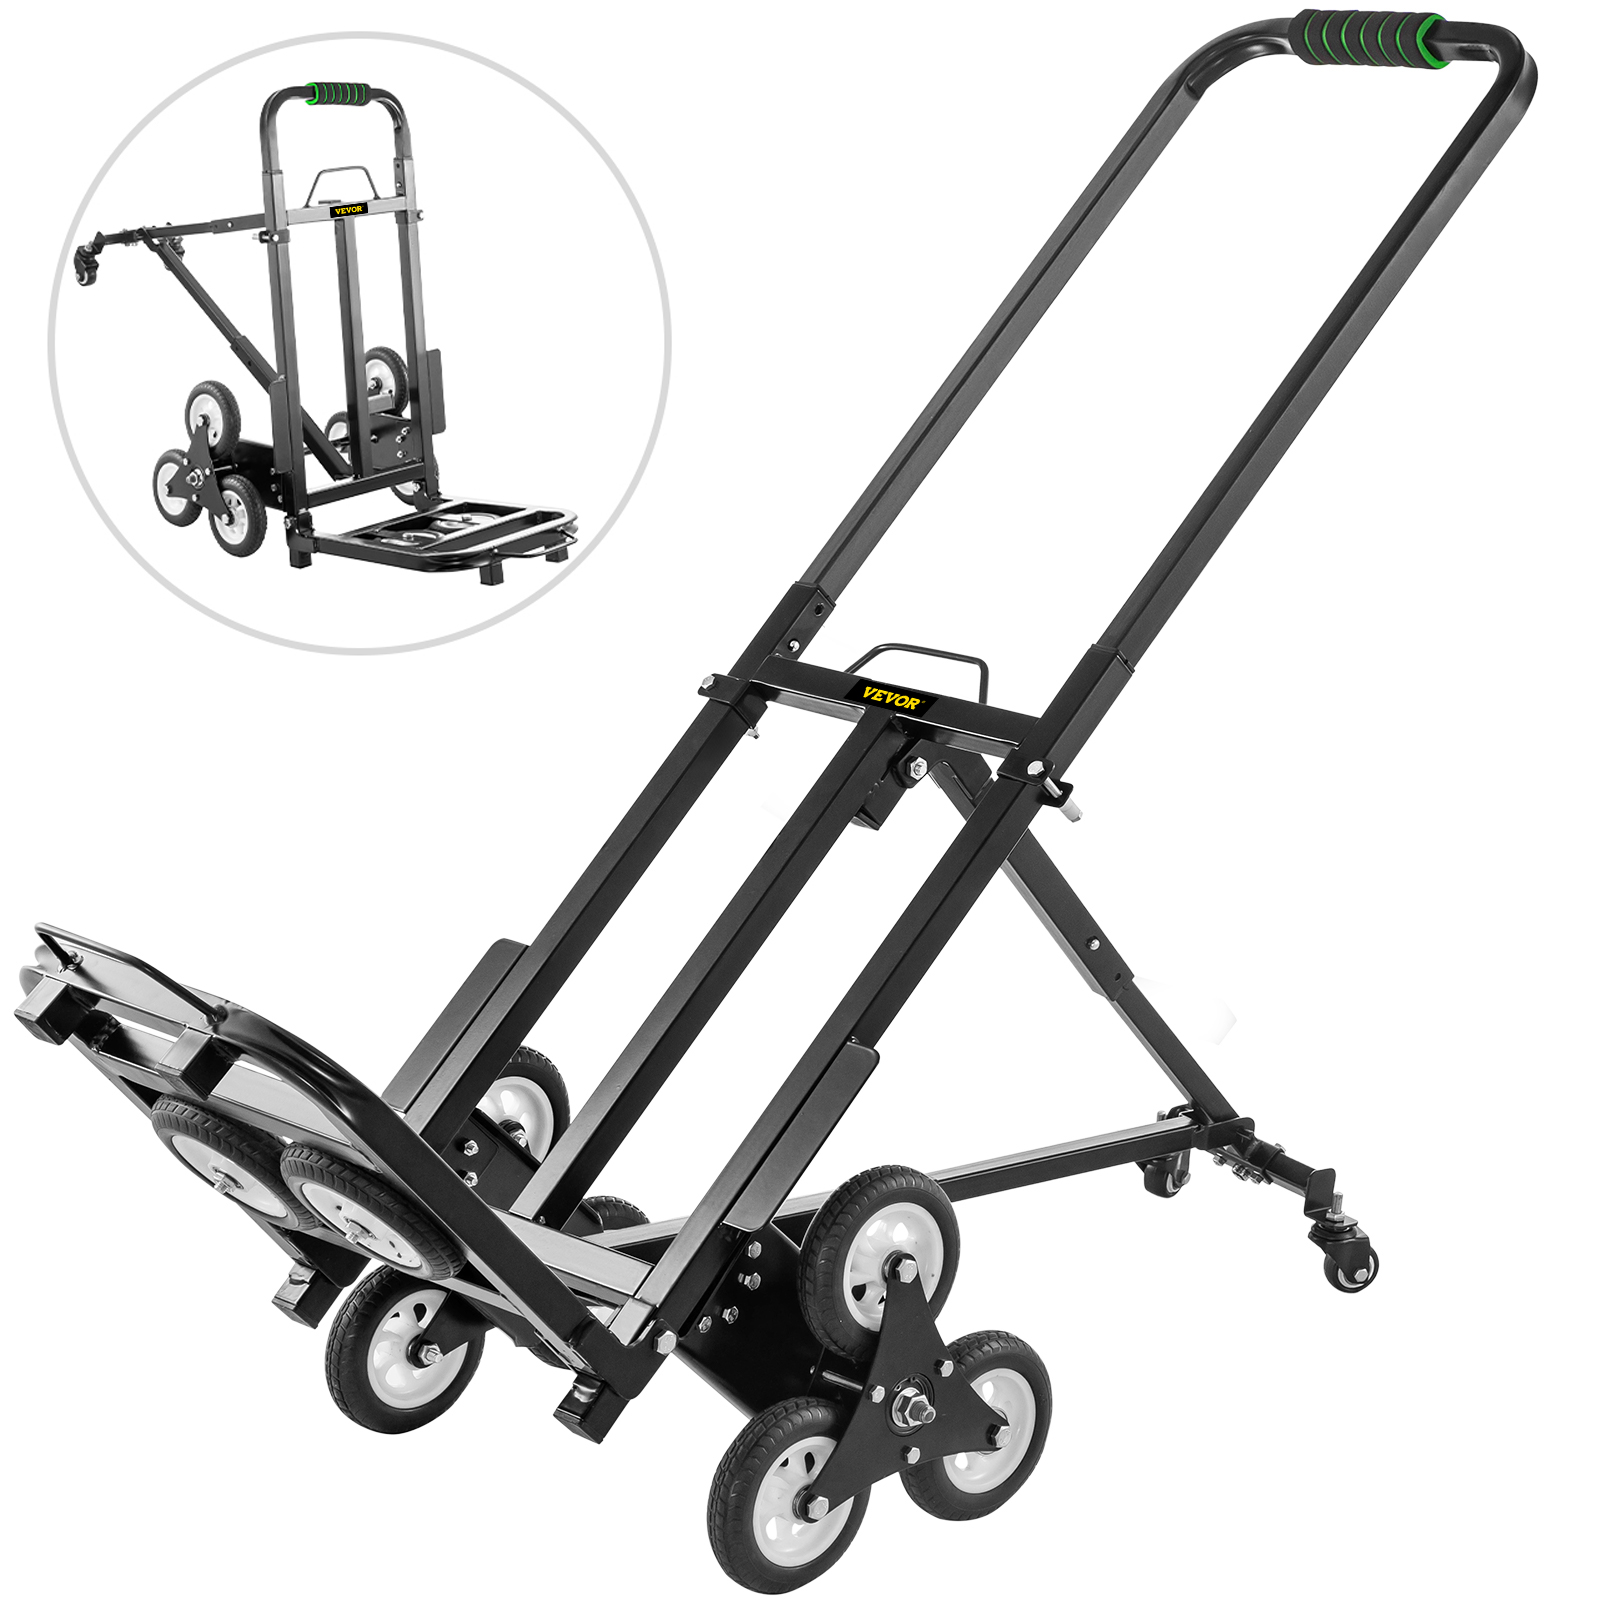 Easily Lift Heavy Items Up and Down Steps Mount-It Portable Dolly for Stairs 3 Wheel Stair Climbing Cart Holds 330 Pounds and Smoothly Rolls on Variety of Surfaces Stair Climbing Dolly